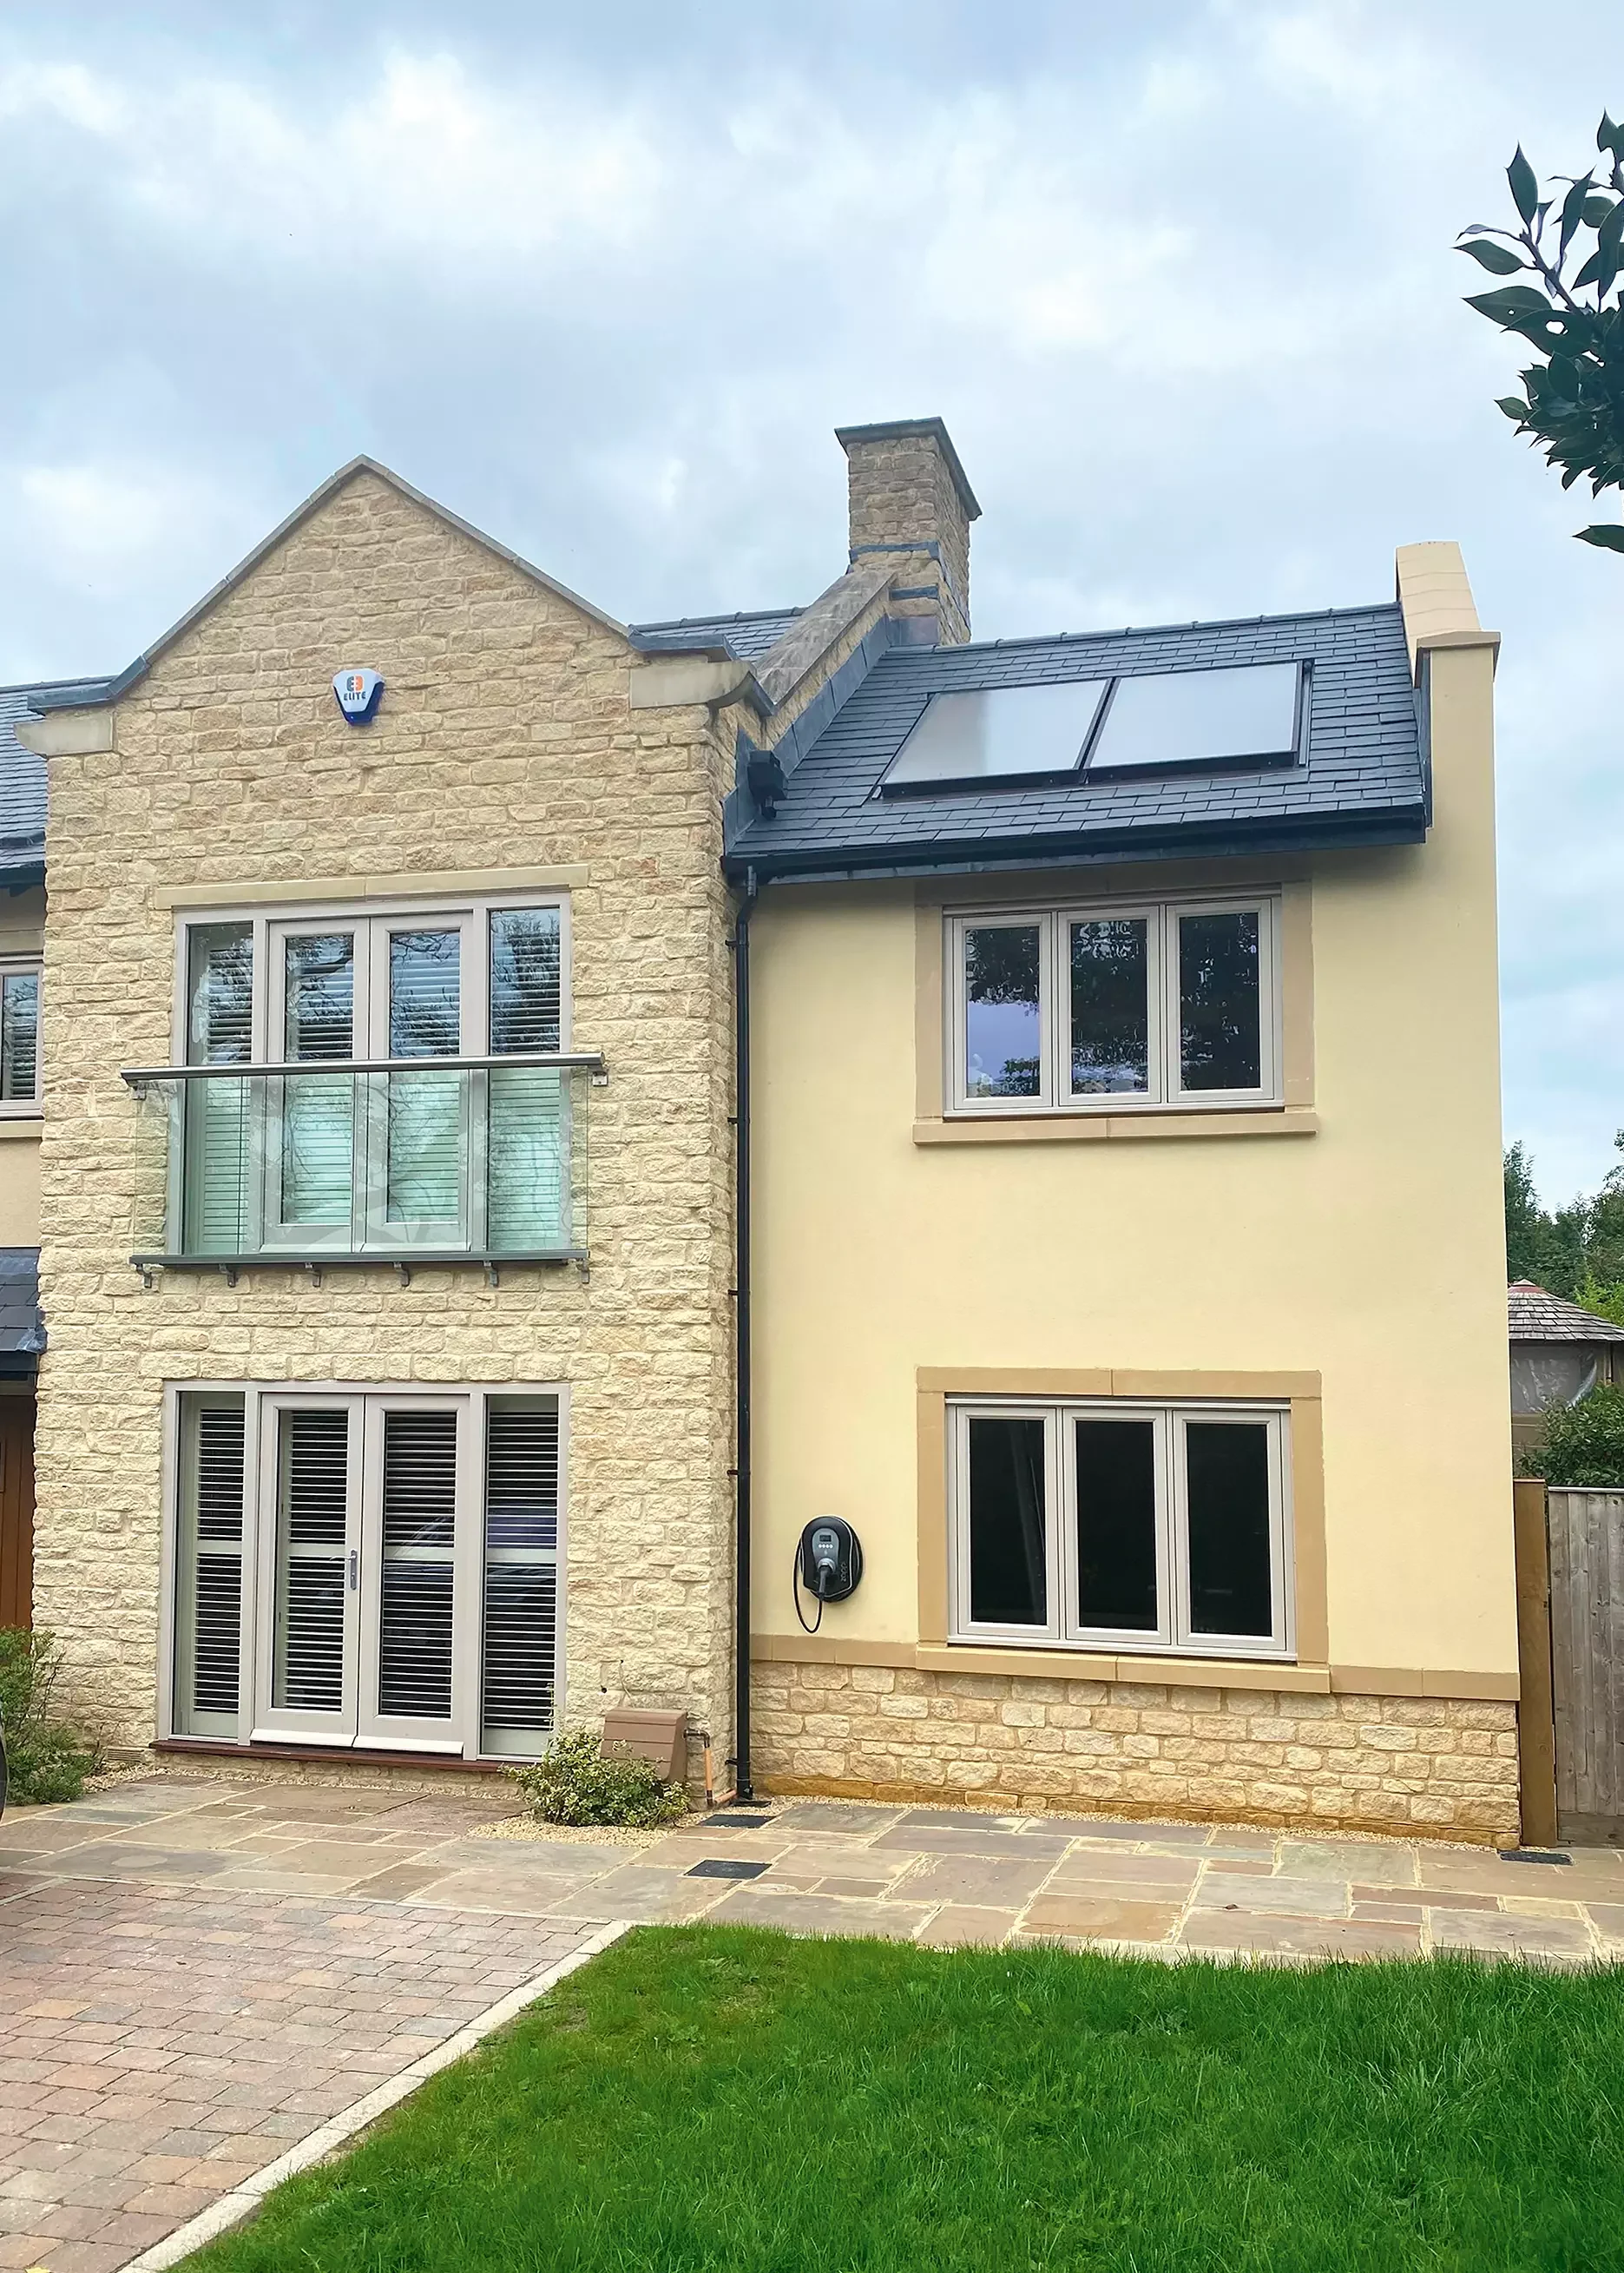 five bedroom house using solar thermal system 